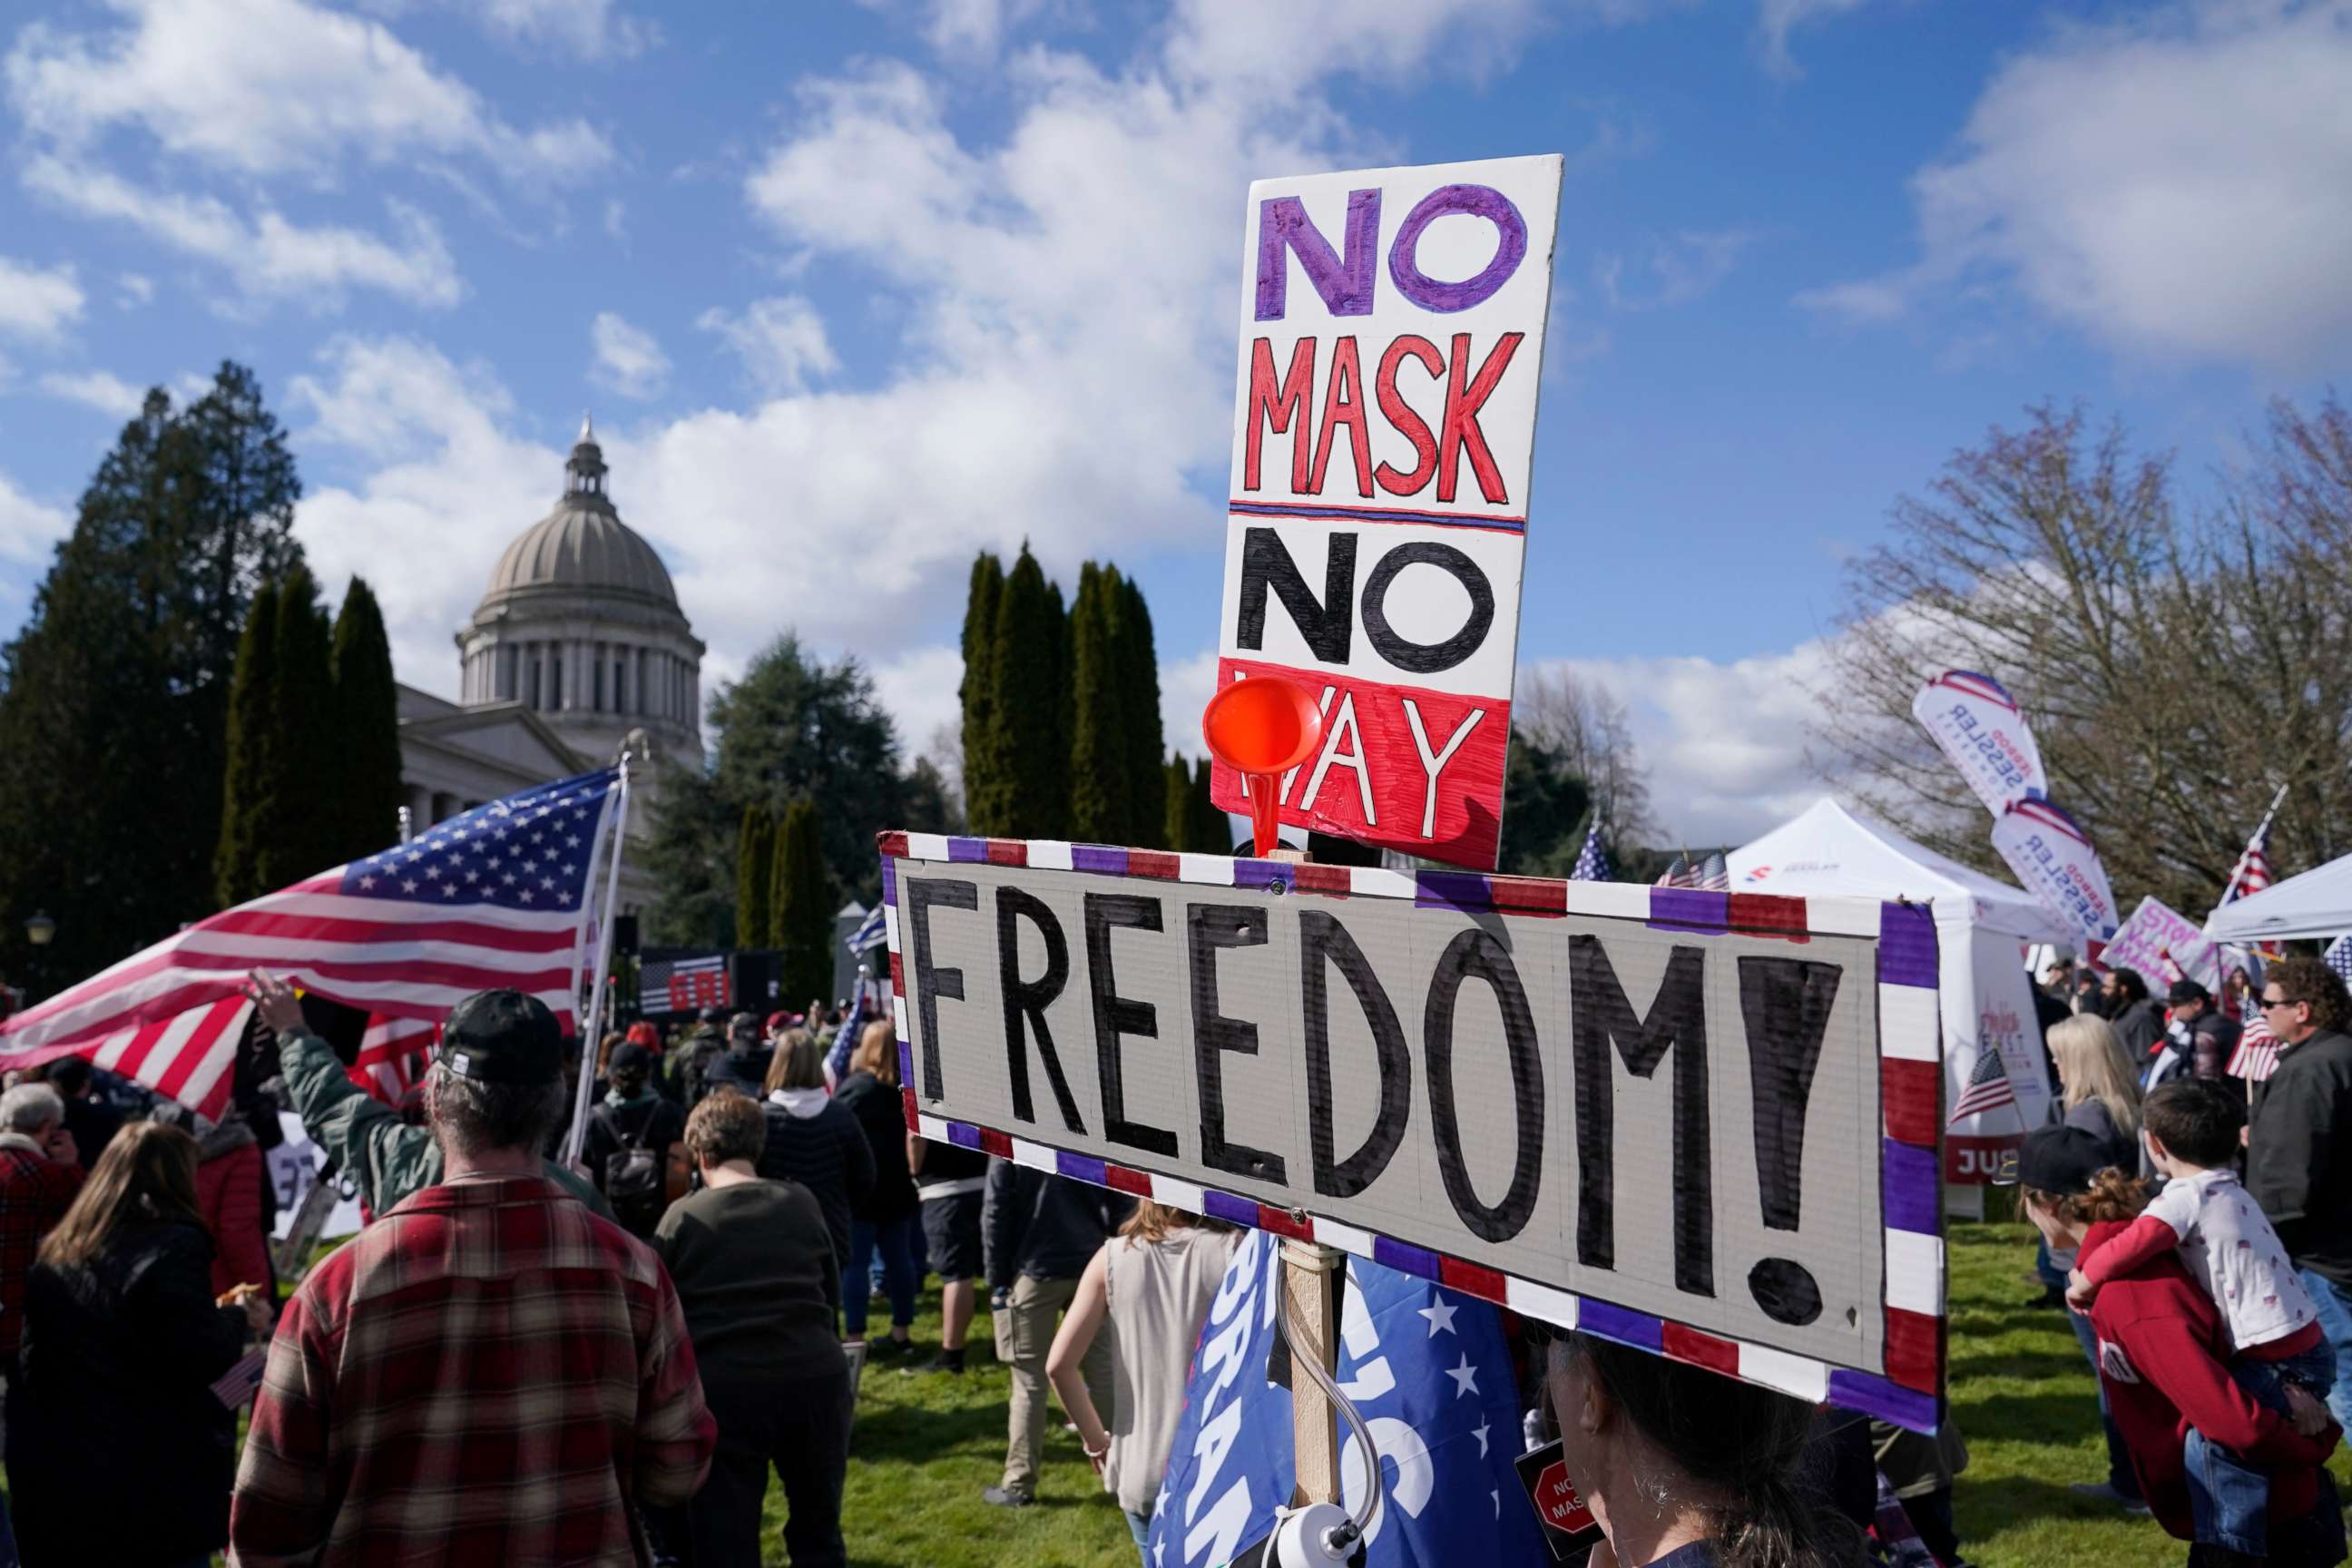 PHOTO: A person holds a sign that reads "No Mask No Way Freedom!" during a protest against COVID-19 vaccine mandates and other issues, Saturday, March 5, 2022, at the Capitol in Olympia, Wash.